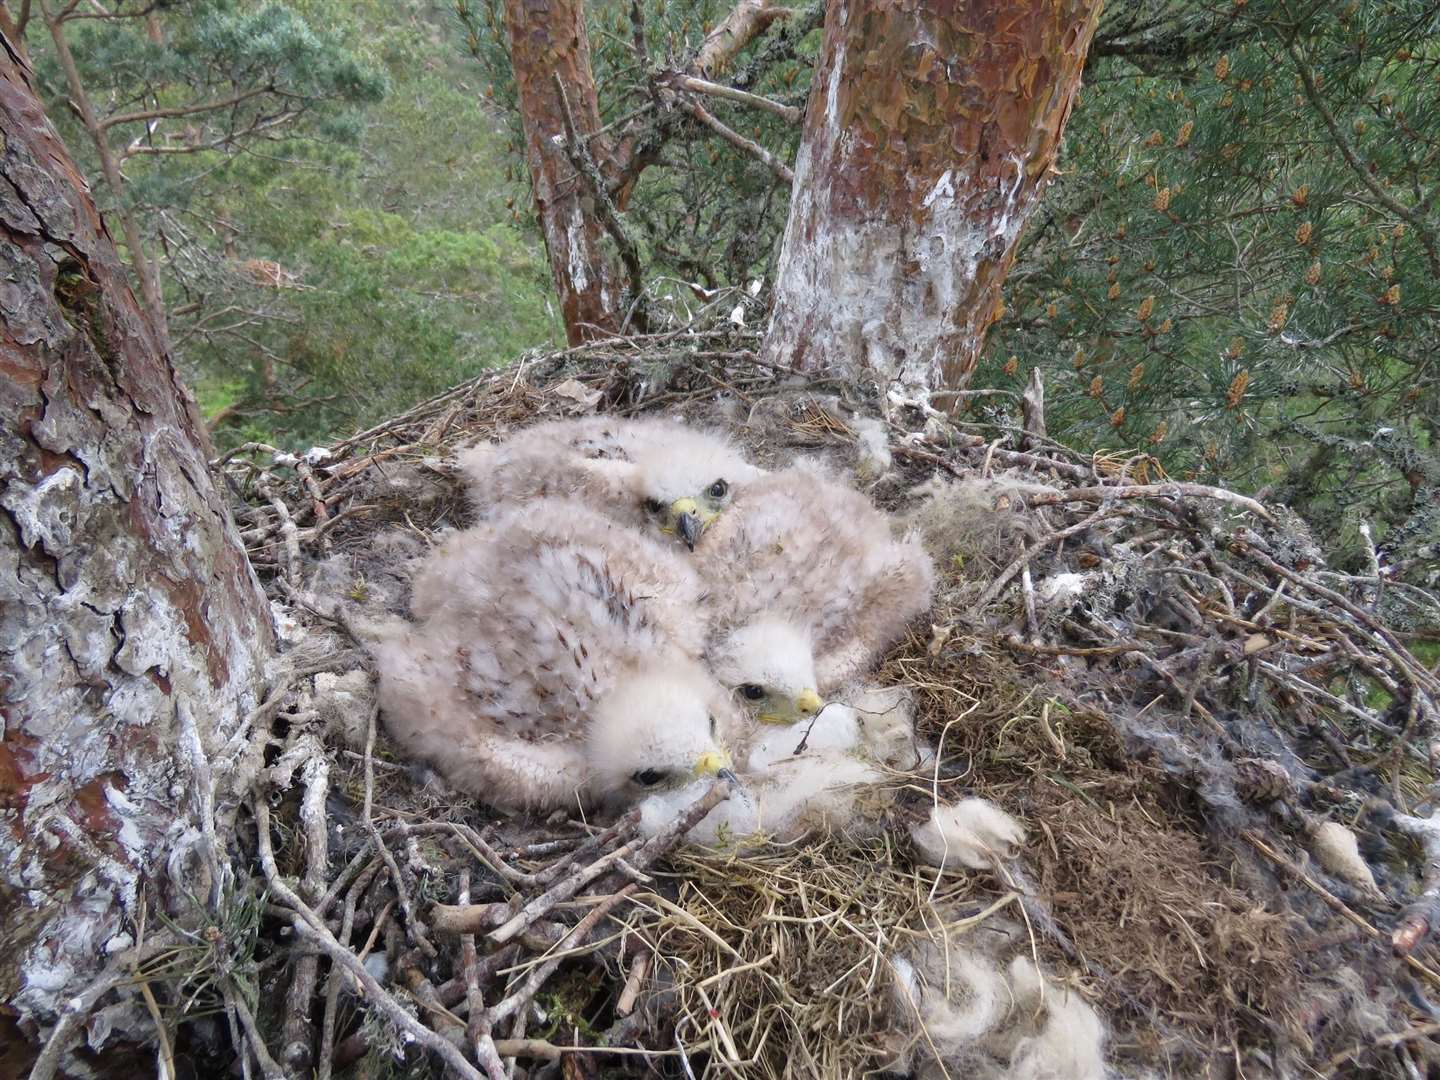 The kite chicks doing well back in the summer of '19.